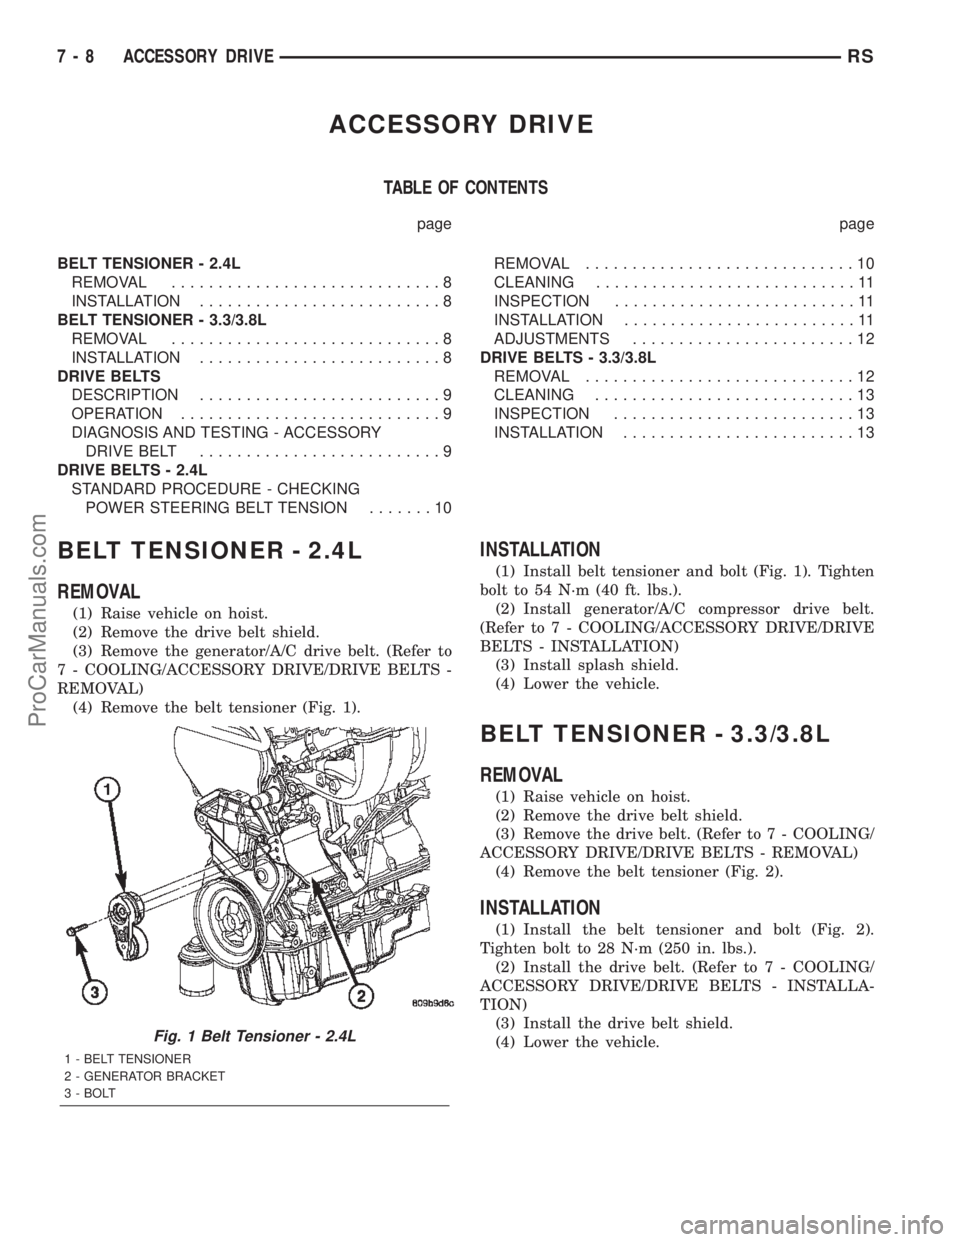 DODGE TOWN AND COUNTRY 2002  Service Manual ACCESSORY DRIVE
TABLE OF CONTENTS
page page
BELT TENSIONER - 2.4L
REMOVAL.............................8
INSTALLATION..........................8
BELT TENSIONER - 3.3/3.8L
REMOVAL.......................